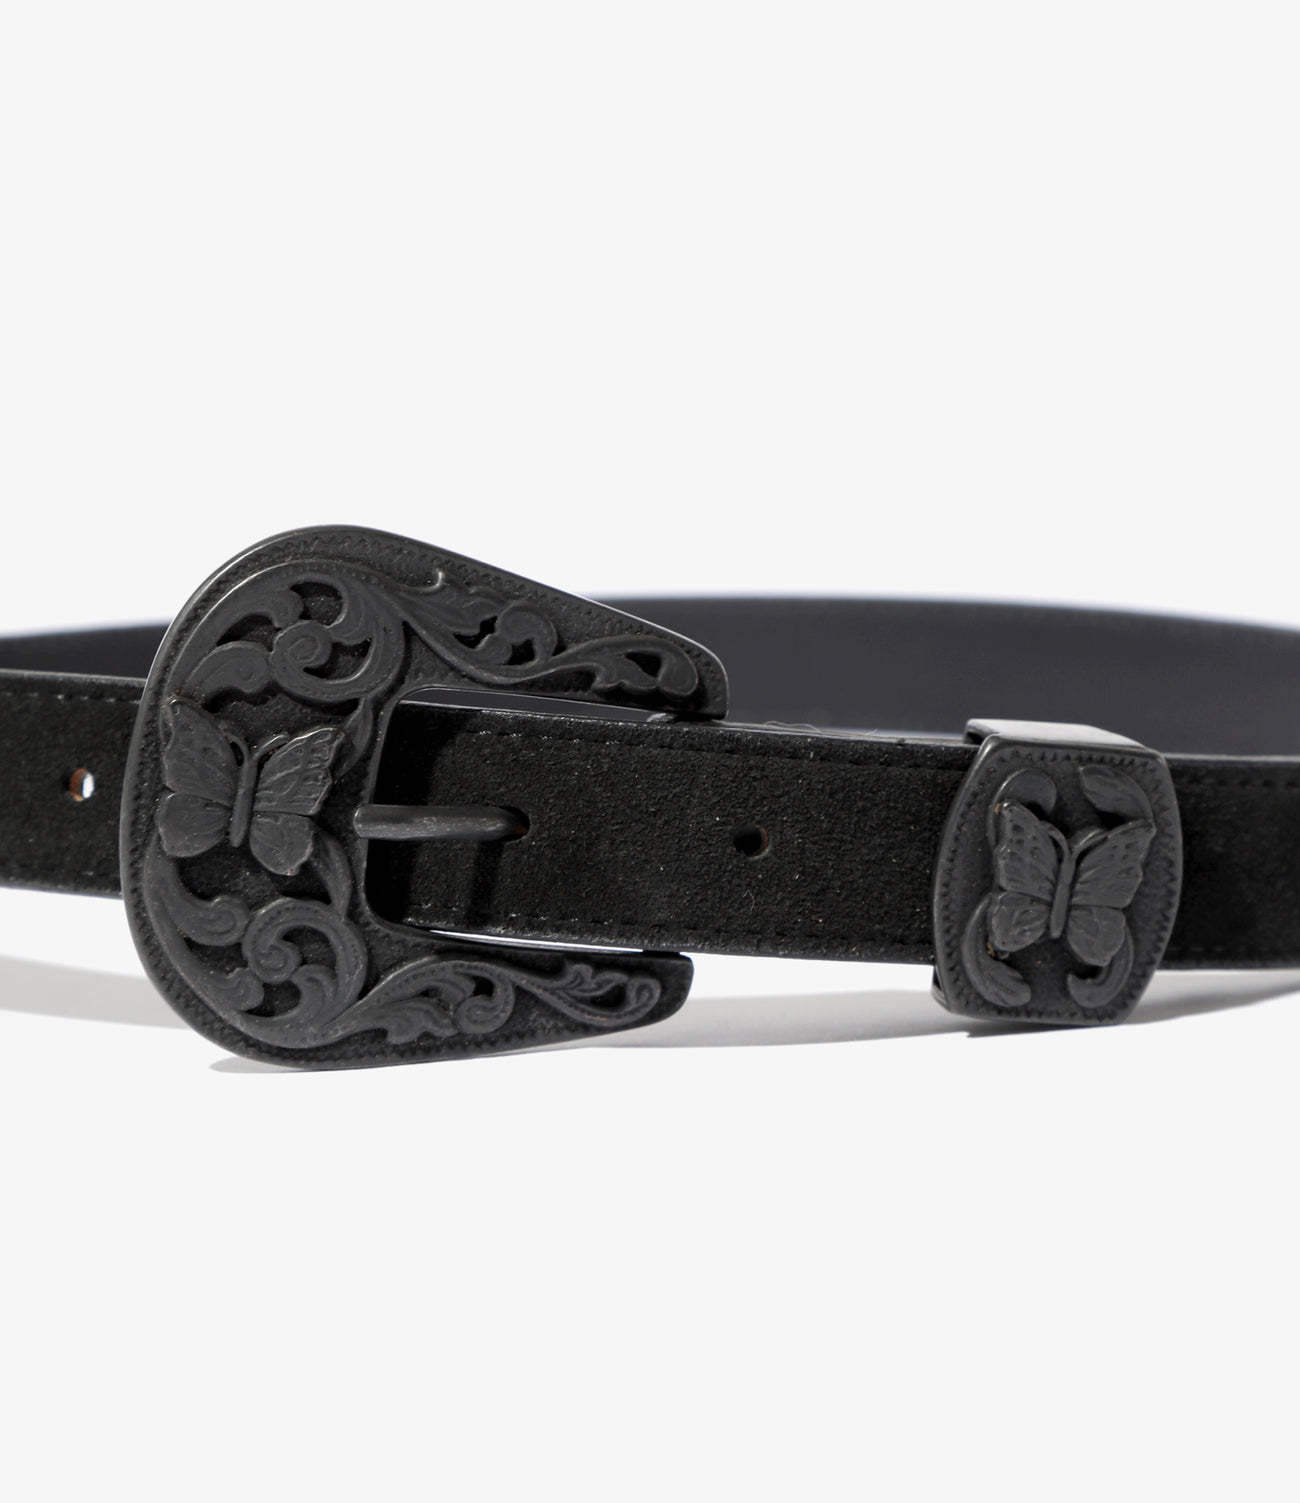 The Buckle Up – Unisex Western Leather Rivet Buckle Belt – Western Leather  Goods